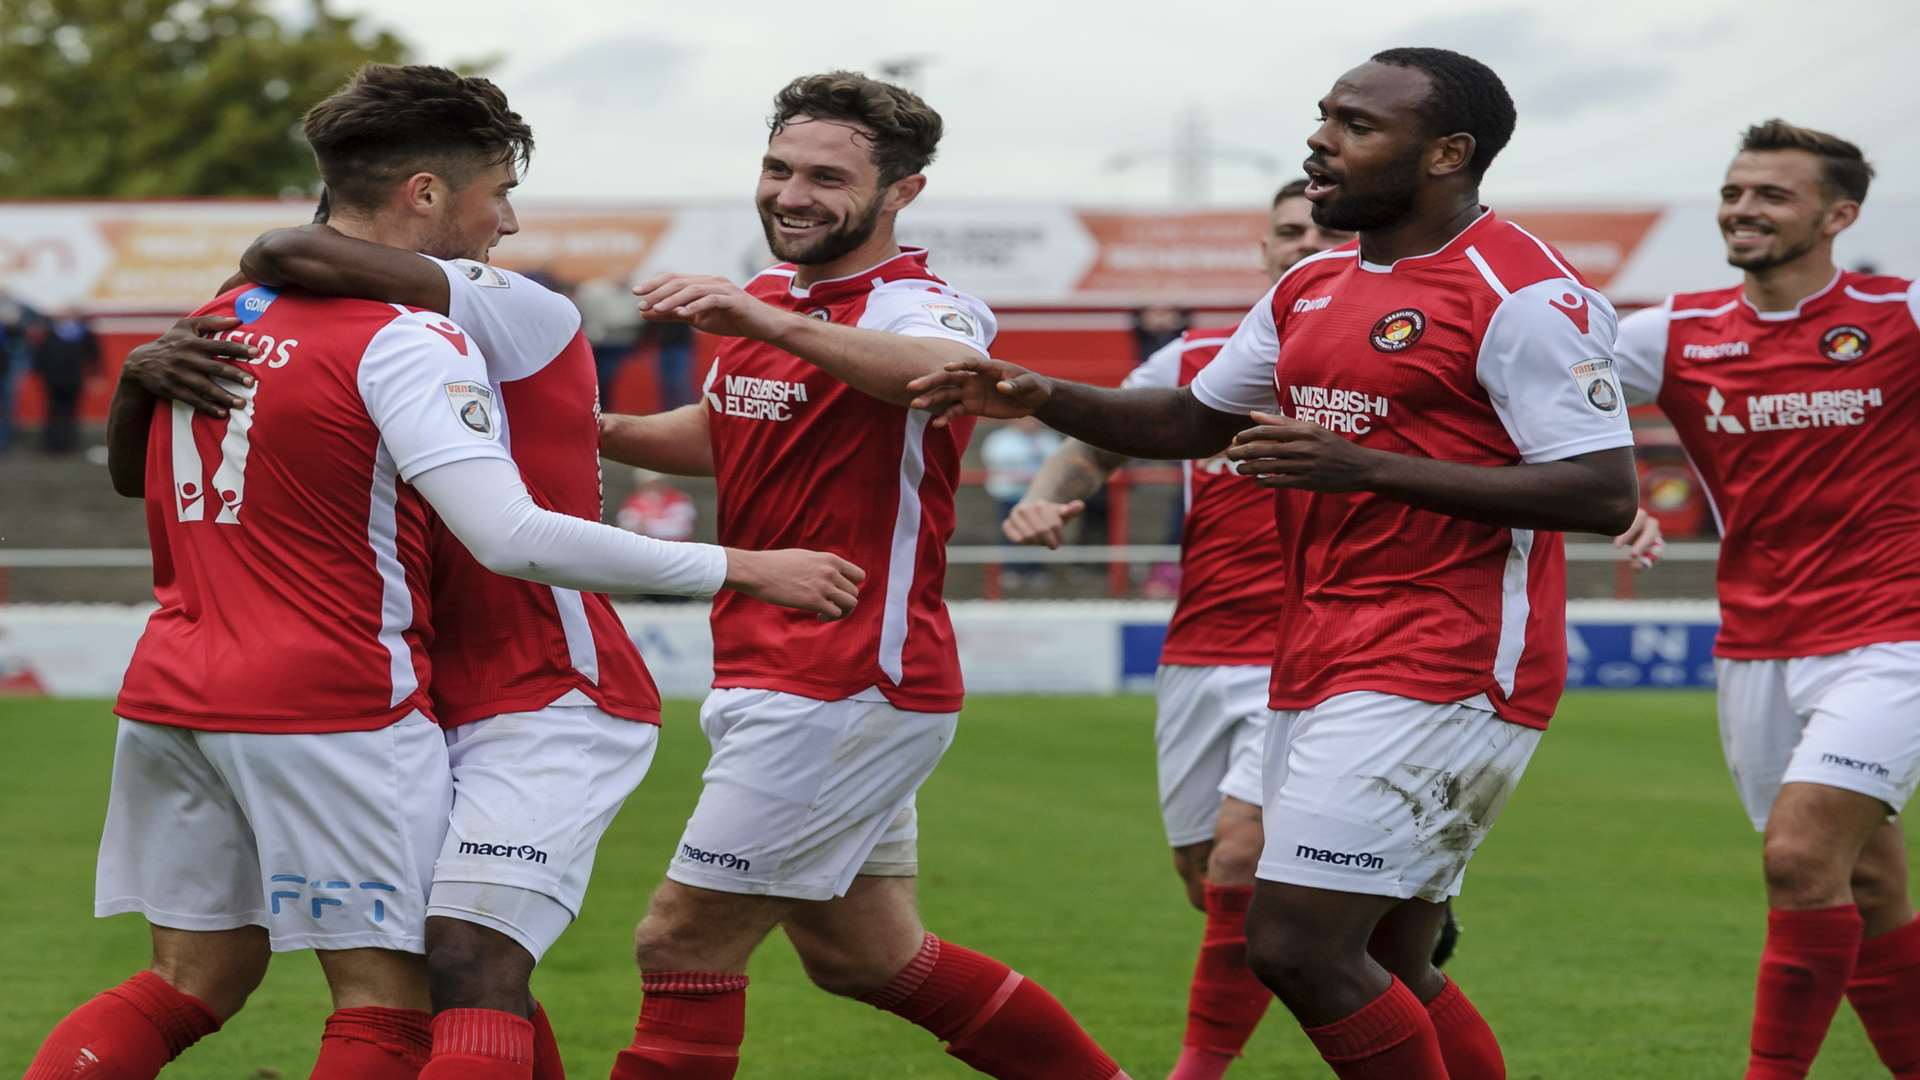 Ebbsfleet are hoping to knock Doncaster out of the FA Cup Picture: Andy Payton